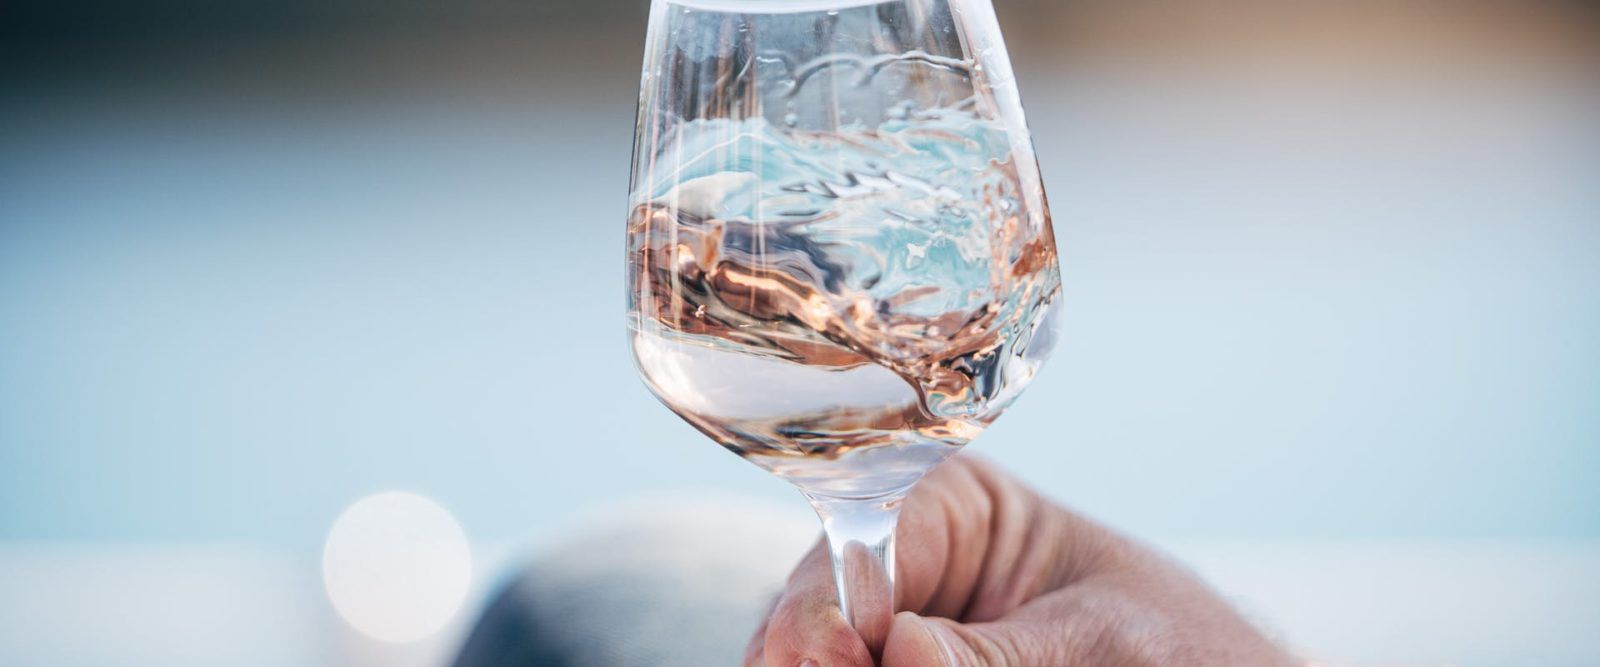 Chanel has created its first rosé wine -- here's everything we know.